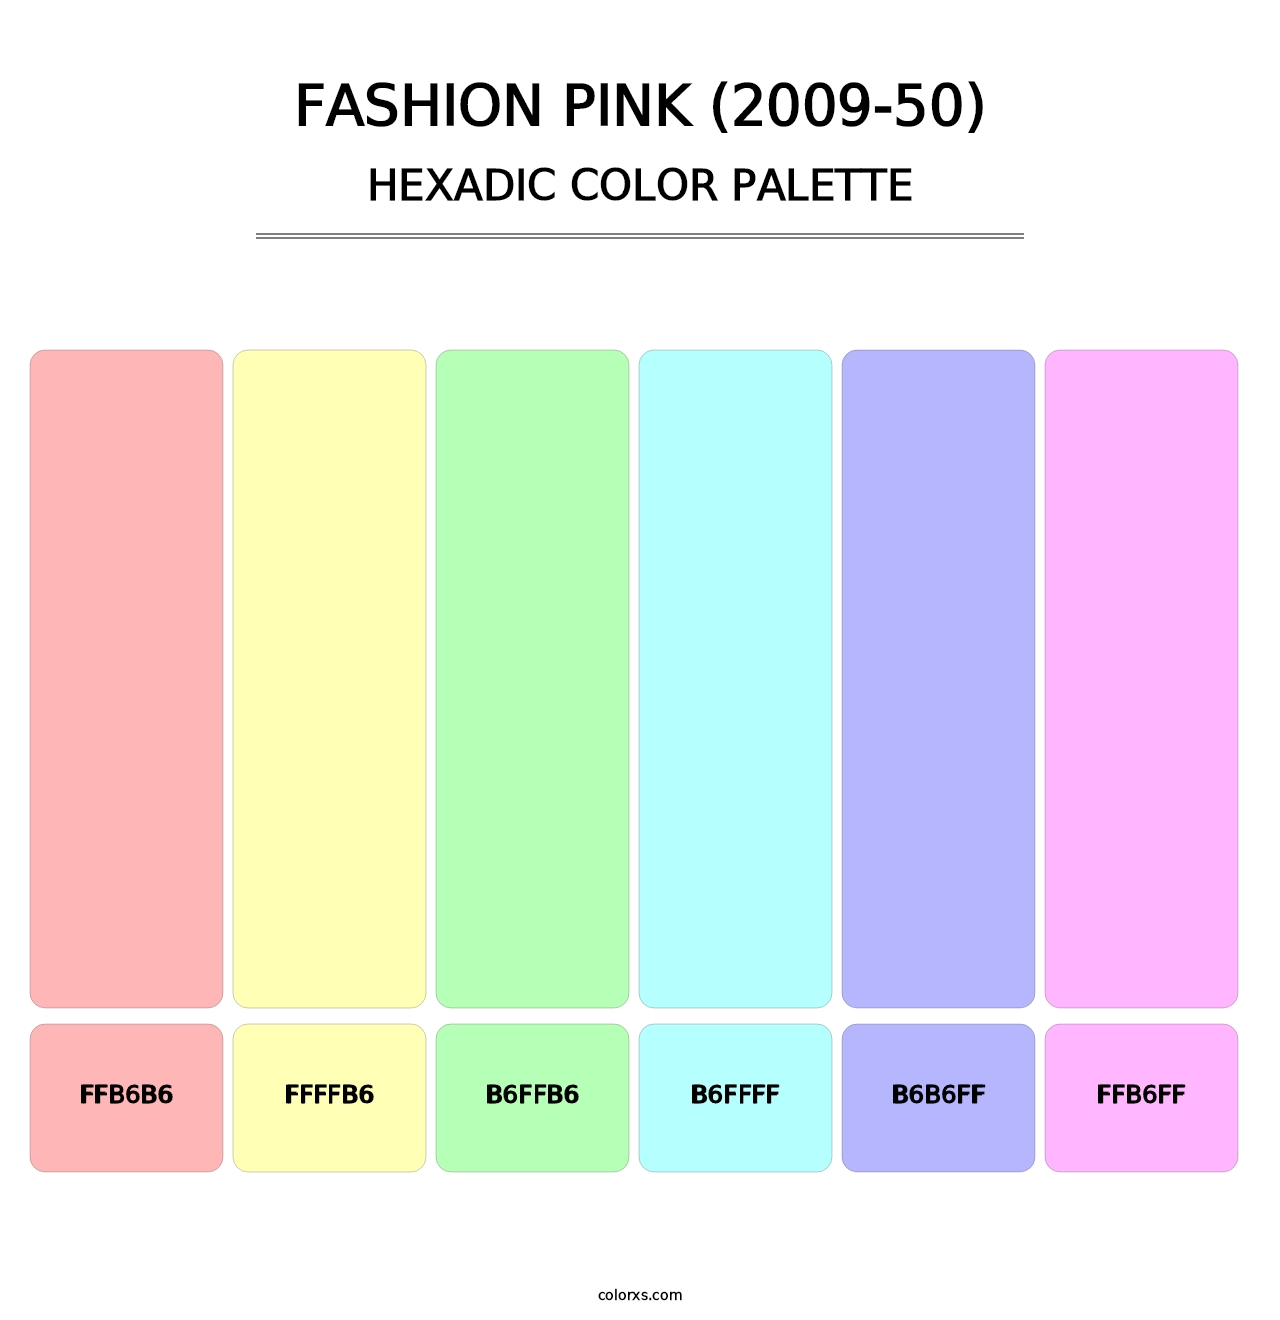 Fashion Pink (2009-50) - Hexadic Color Palette